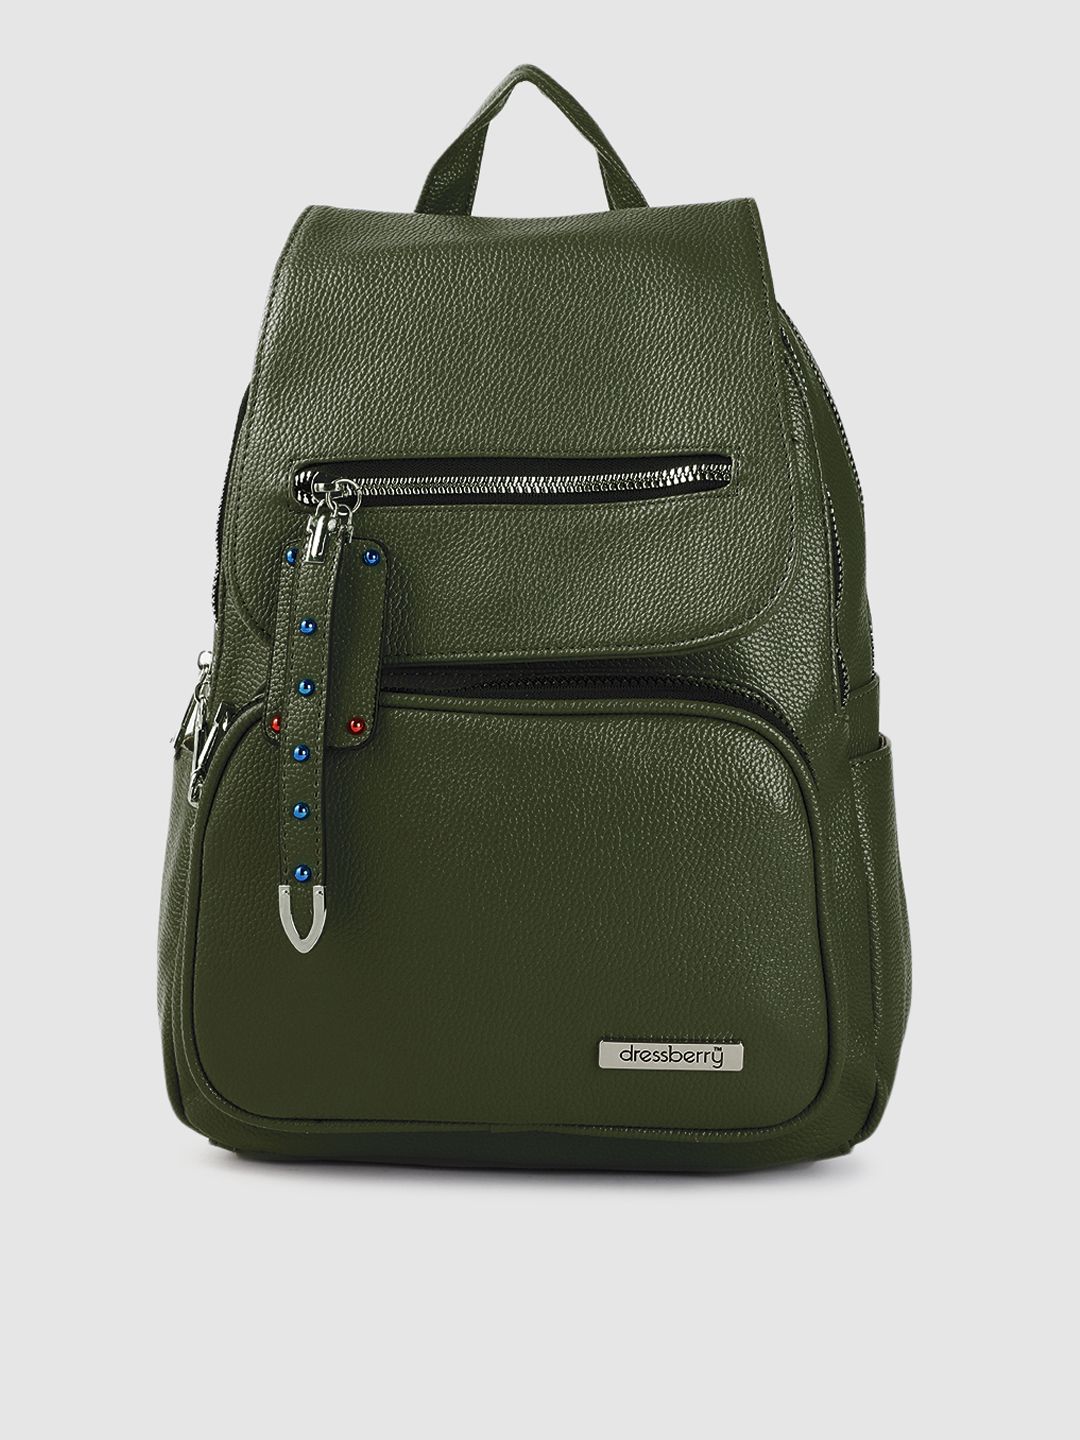 DressBerry Women Olive Green Tasselled Backpack Price in India